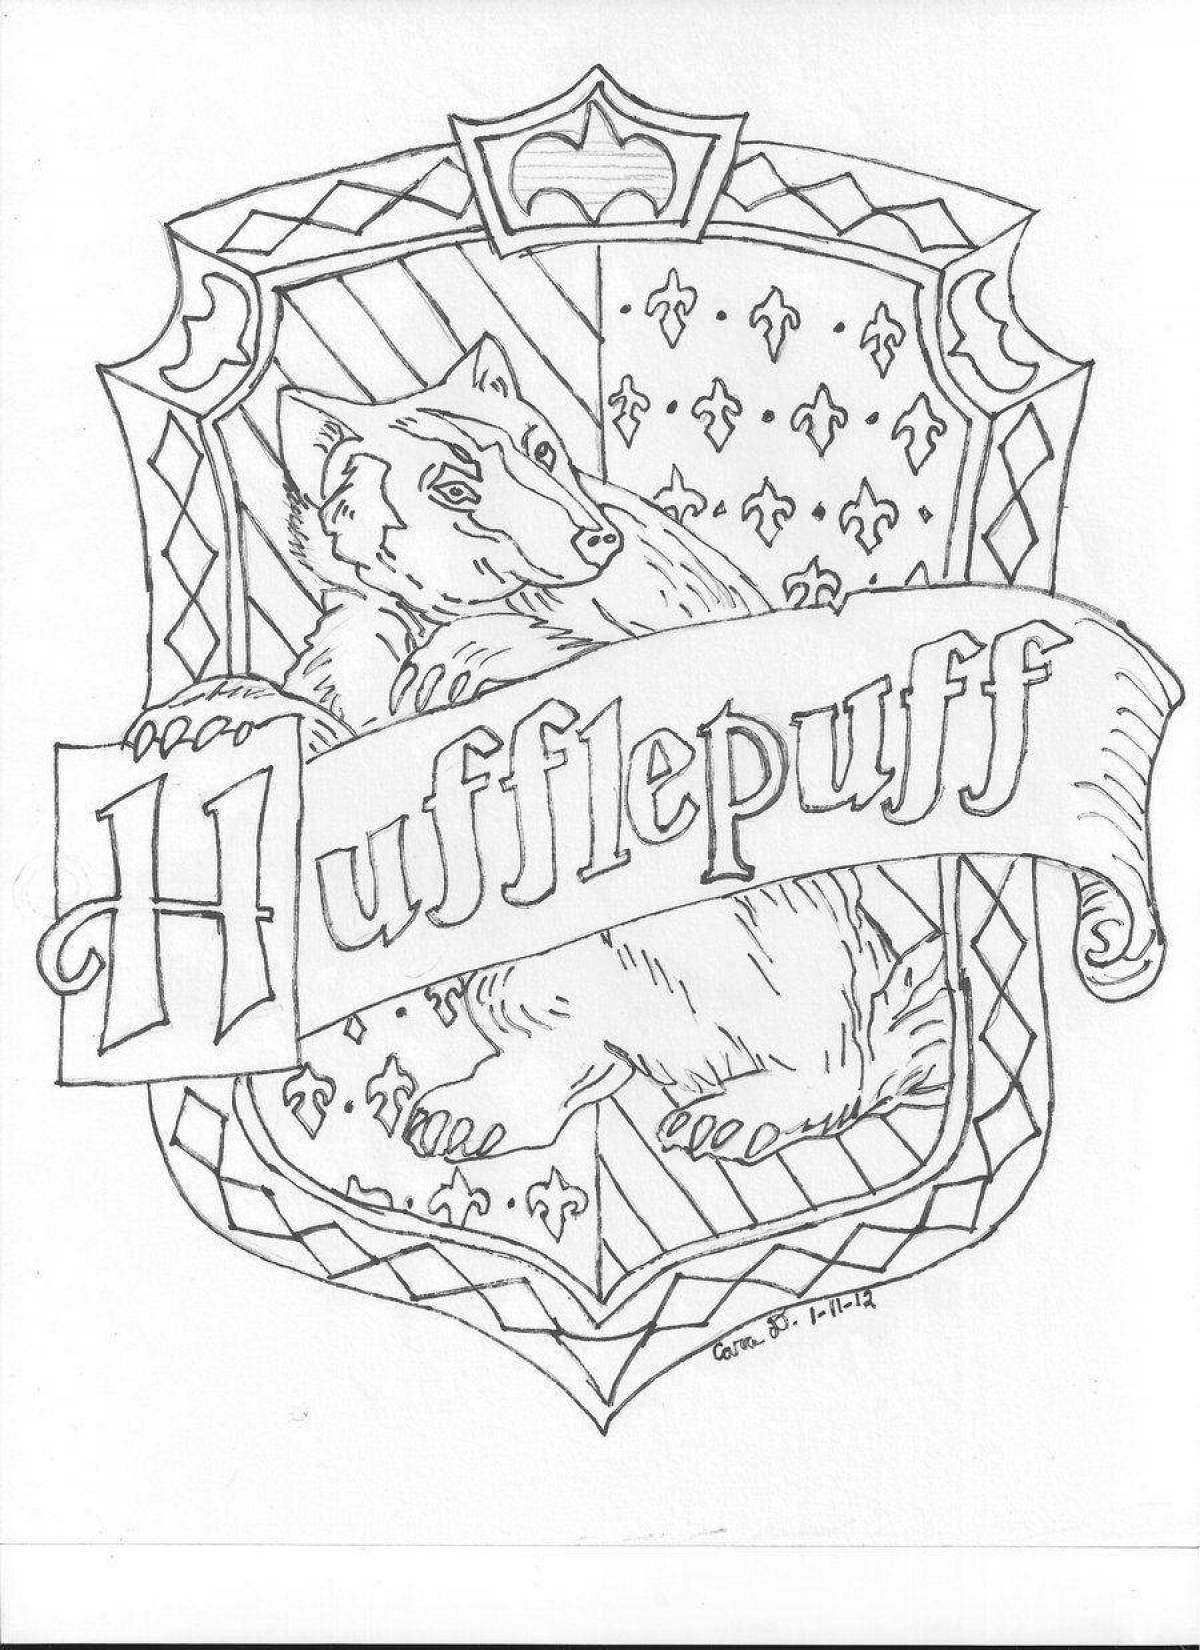 A brightly colored coat of arms of Hogwarts coloring book